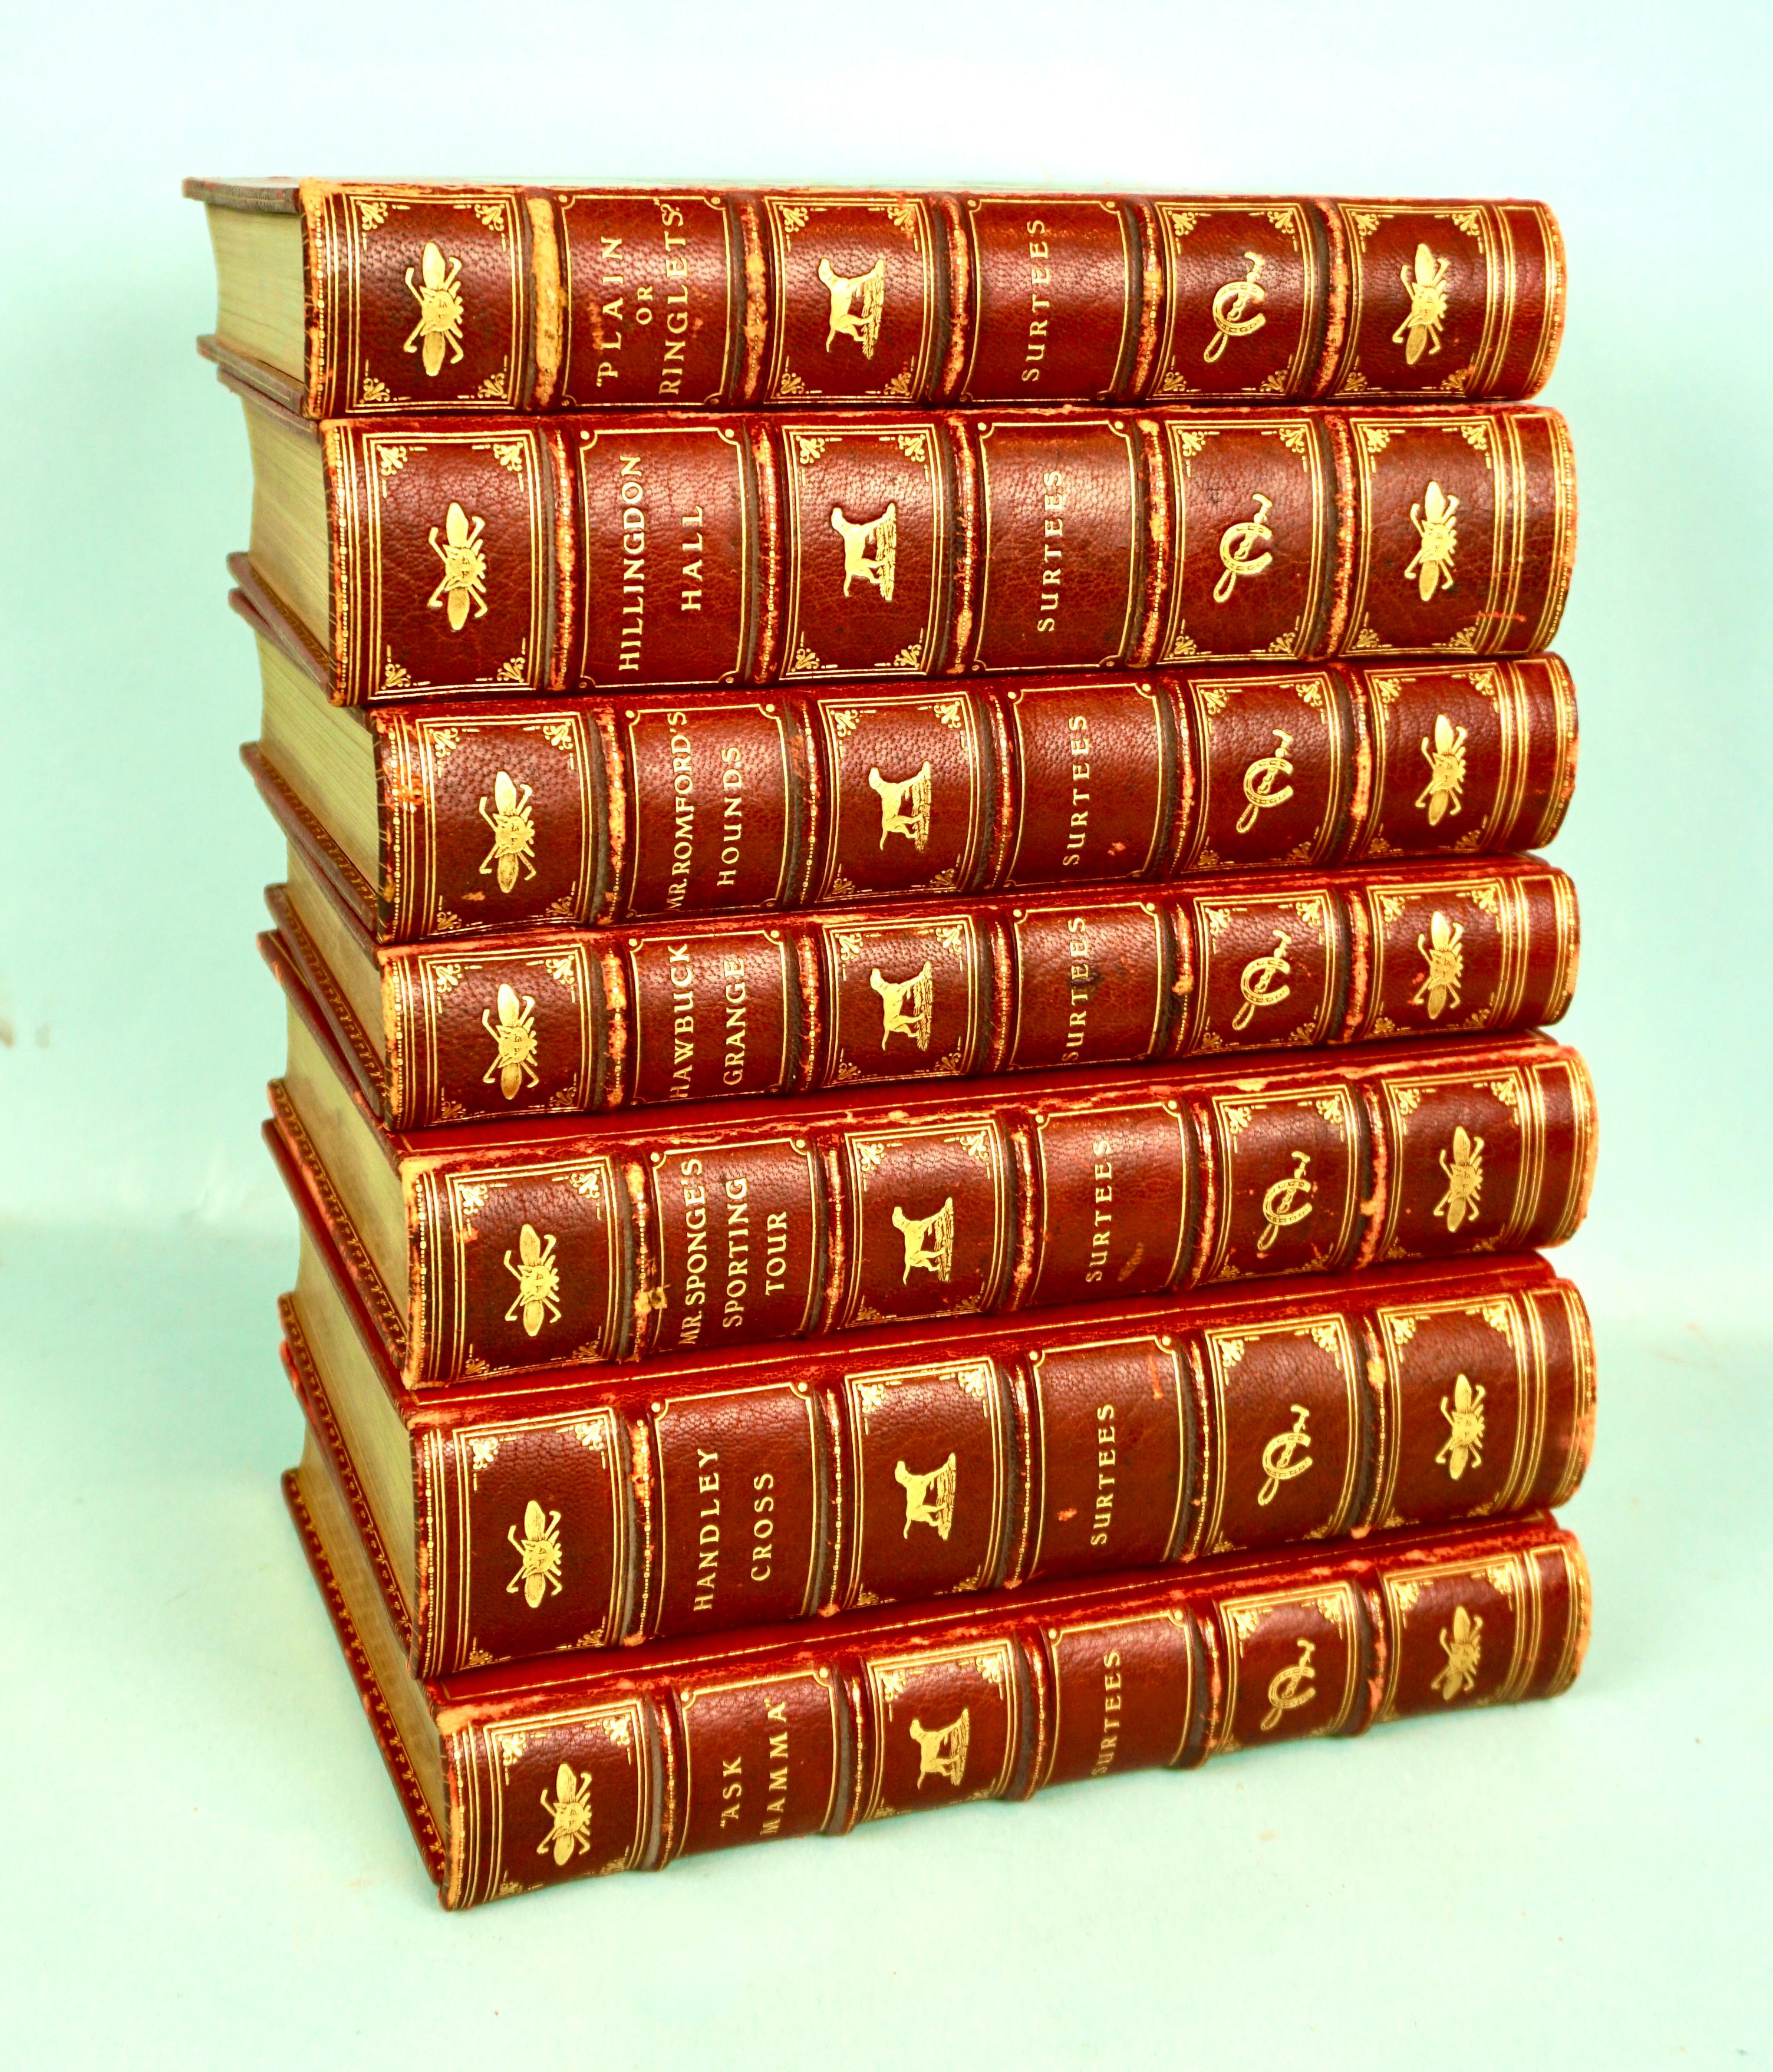 Set of Seven Red Leather Bound Volumes by Robert Surtees English Sporting Author 15